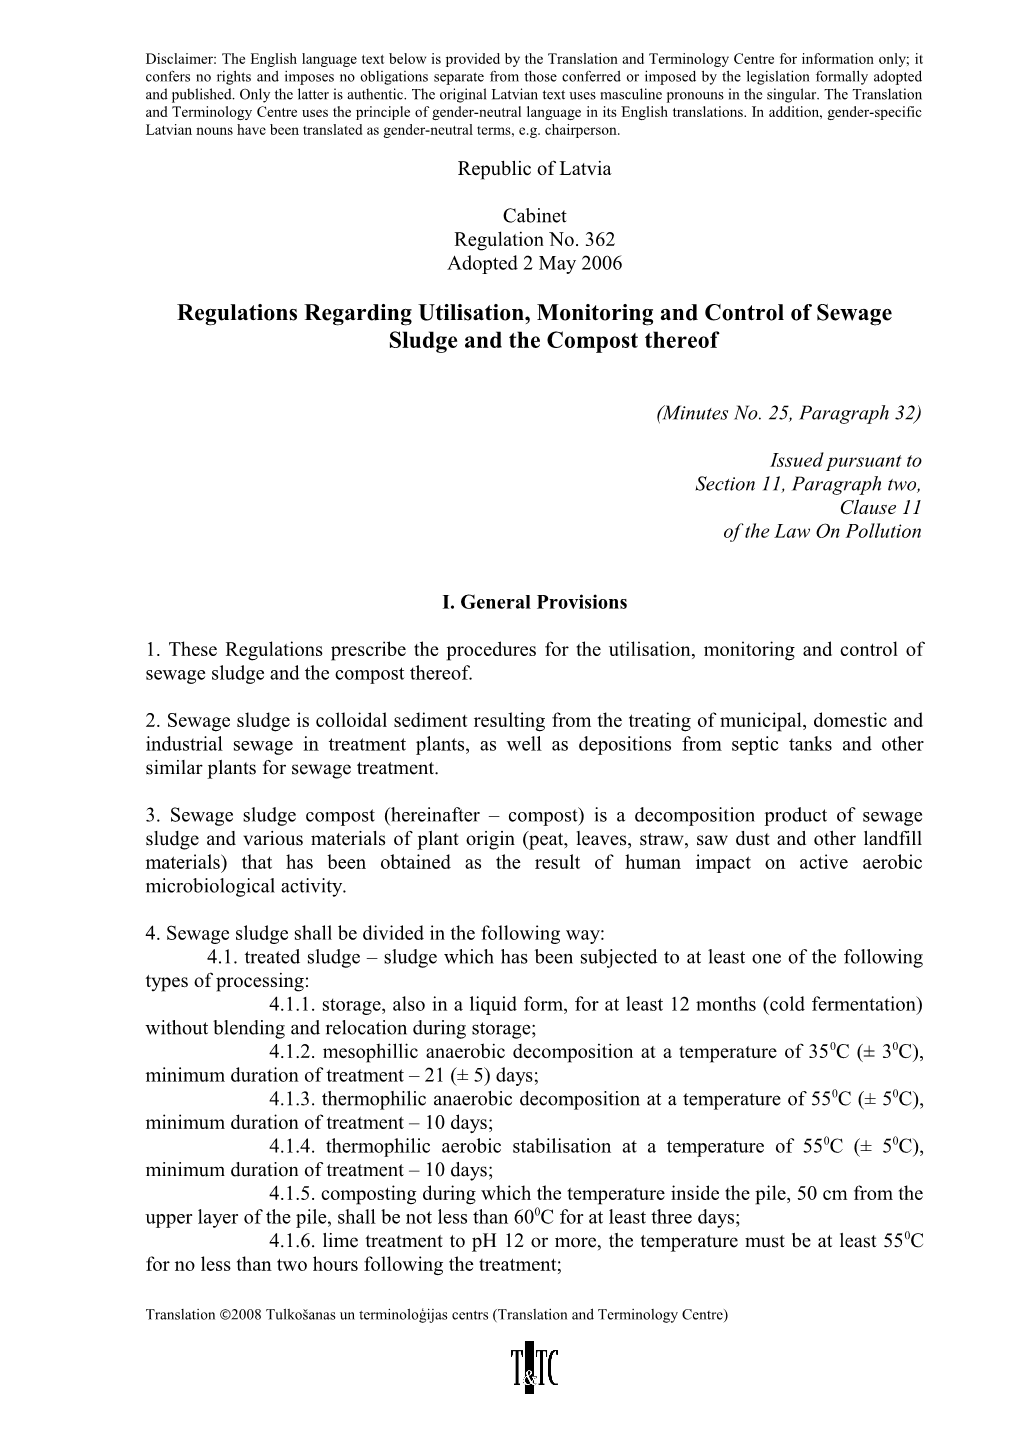 Regulations Regarding Utilisation, Monitoring and Control of Sewage Sludge and the Compost